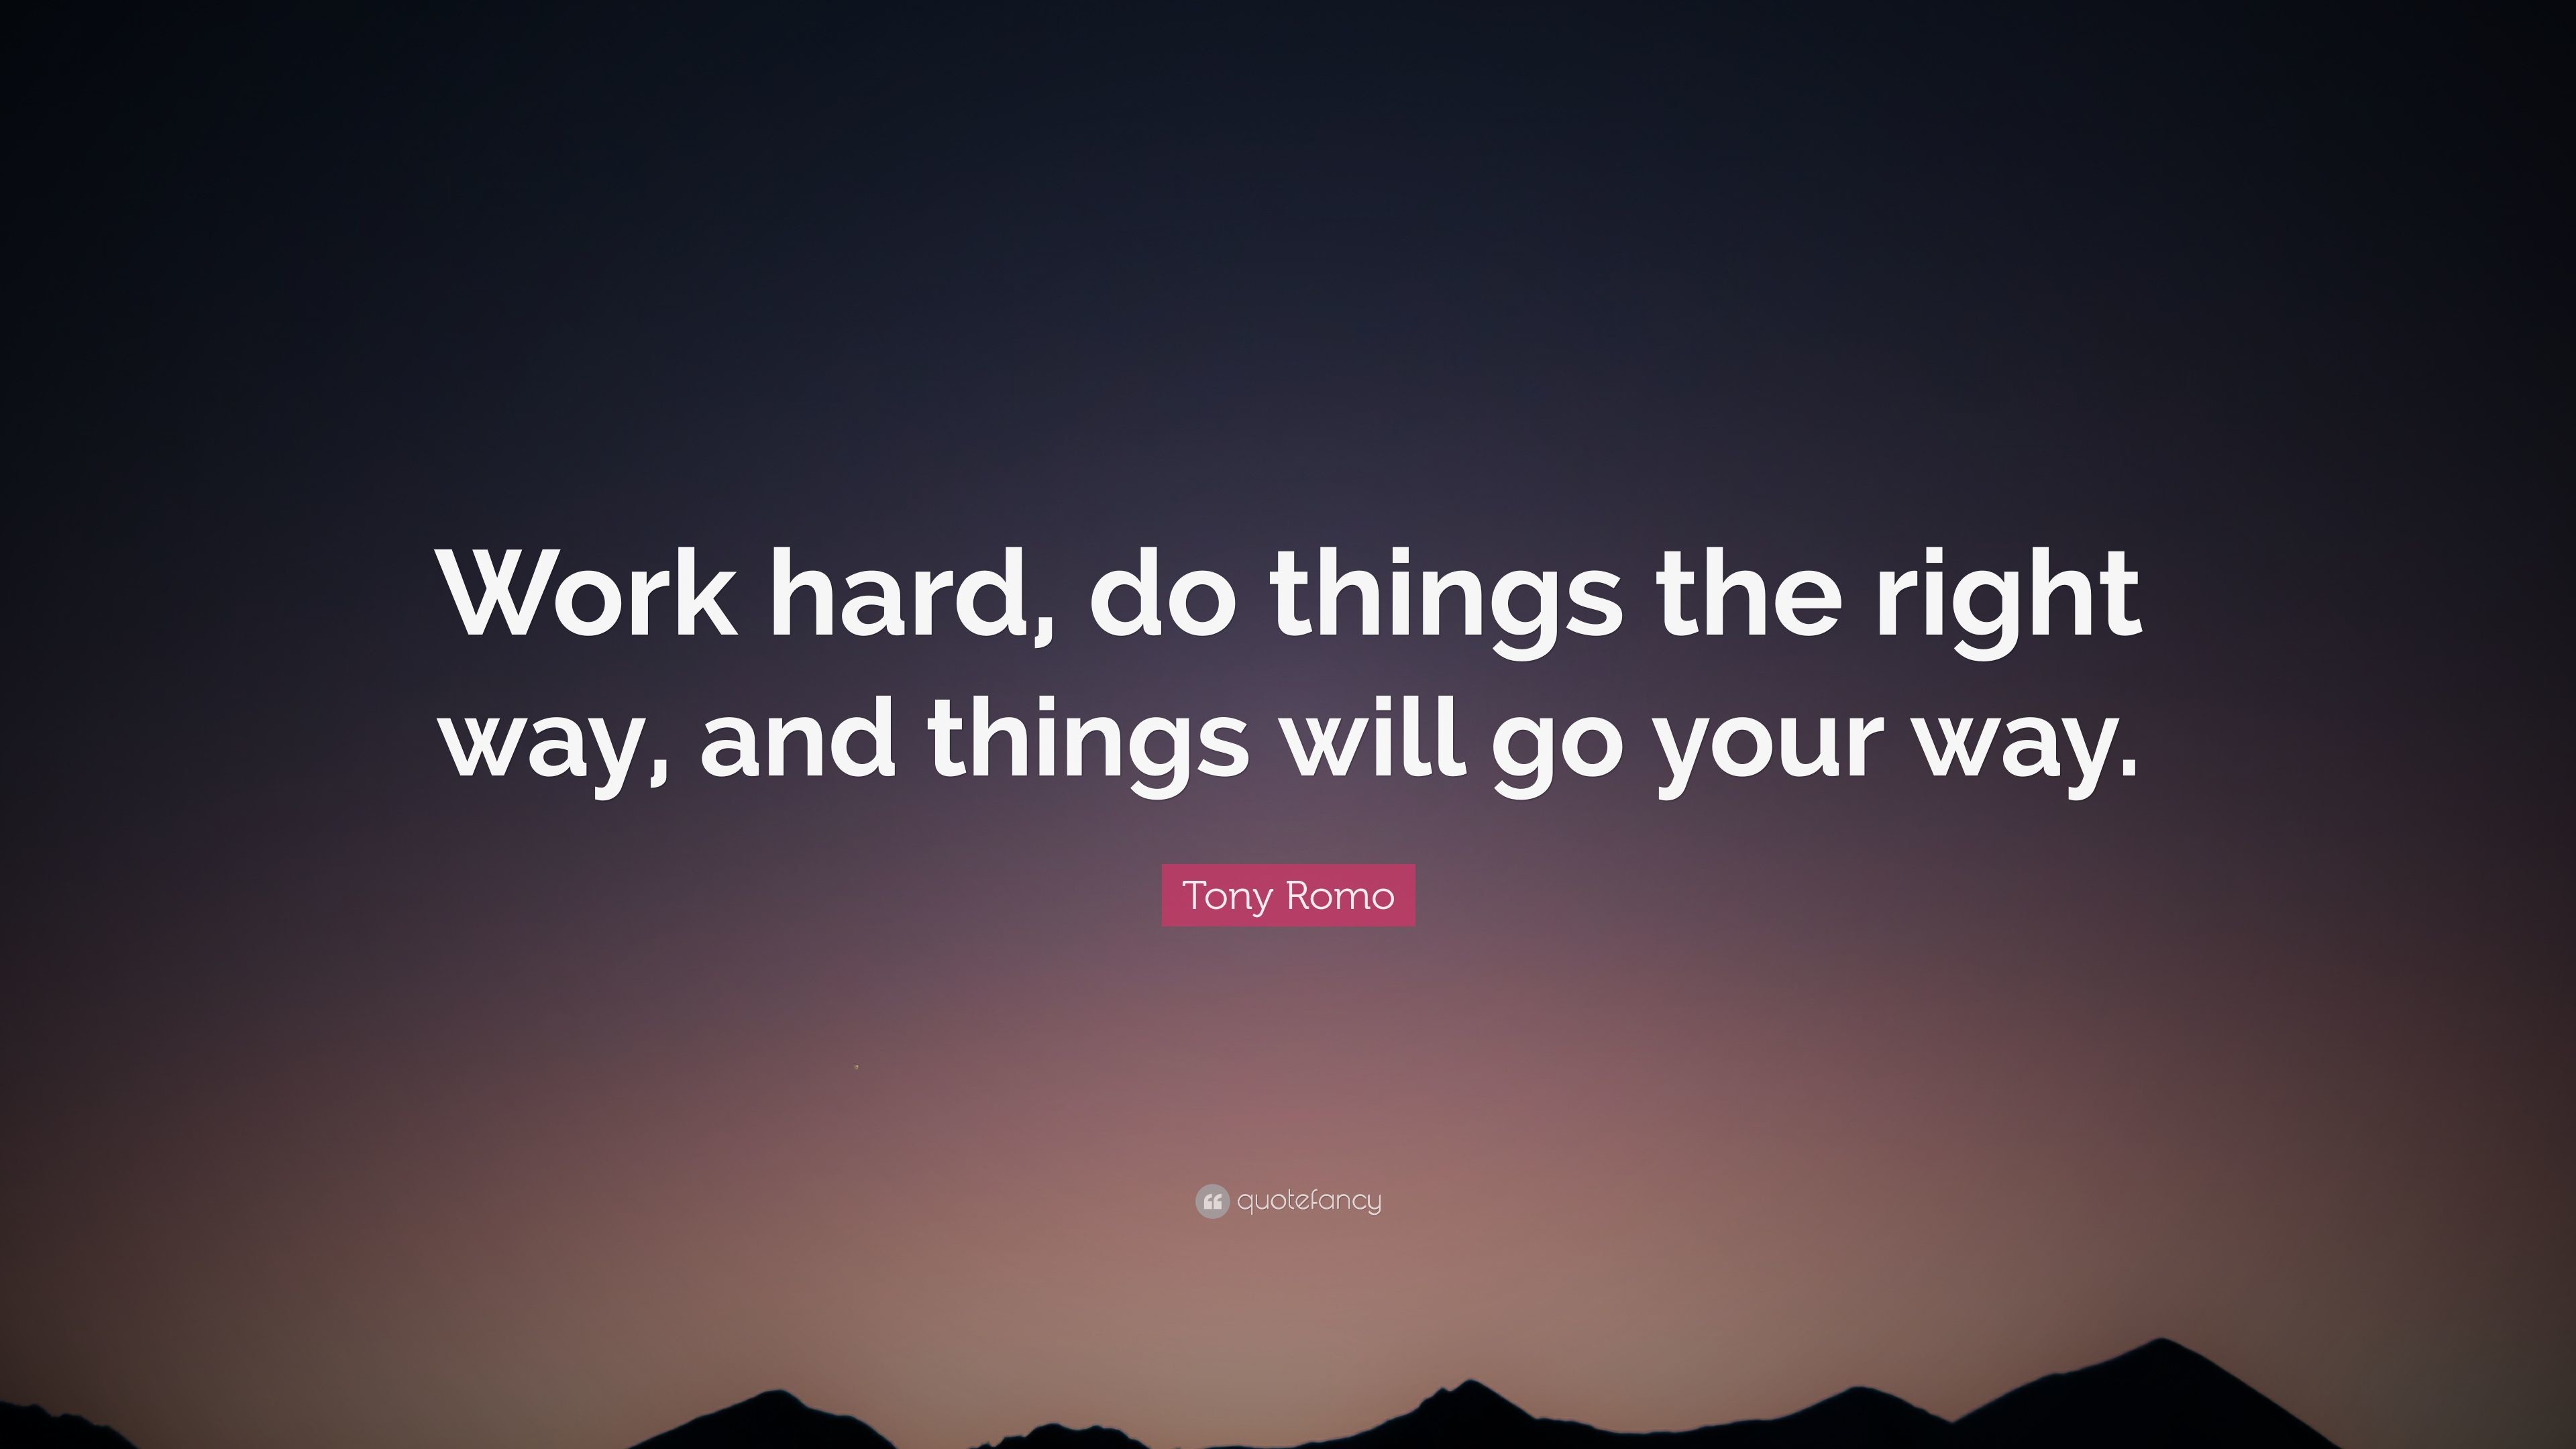 3840x2160 Tony Romo Quote: “Work hard, do things the right way, and things